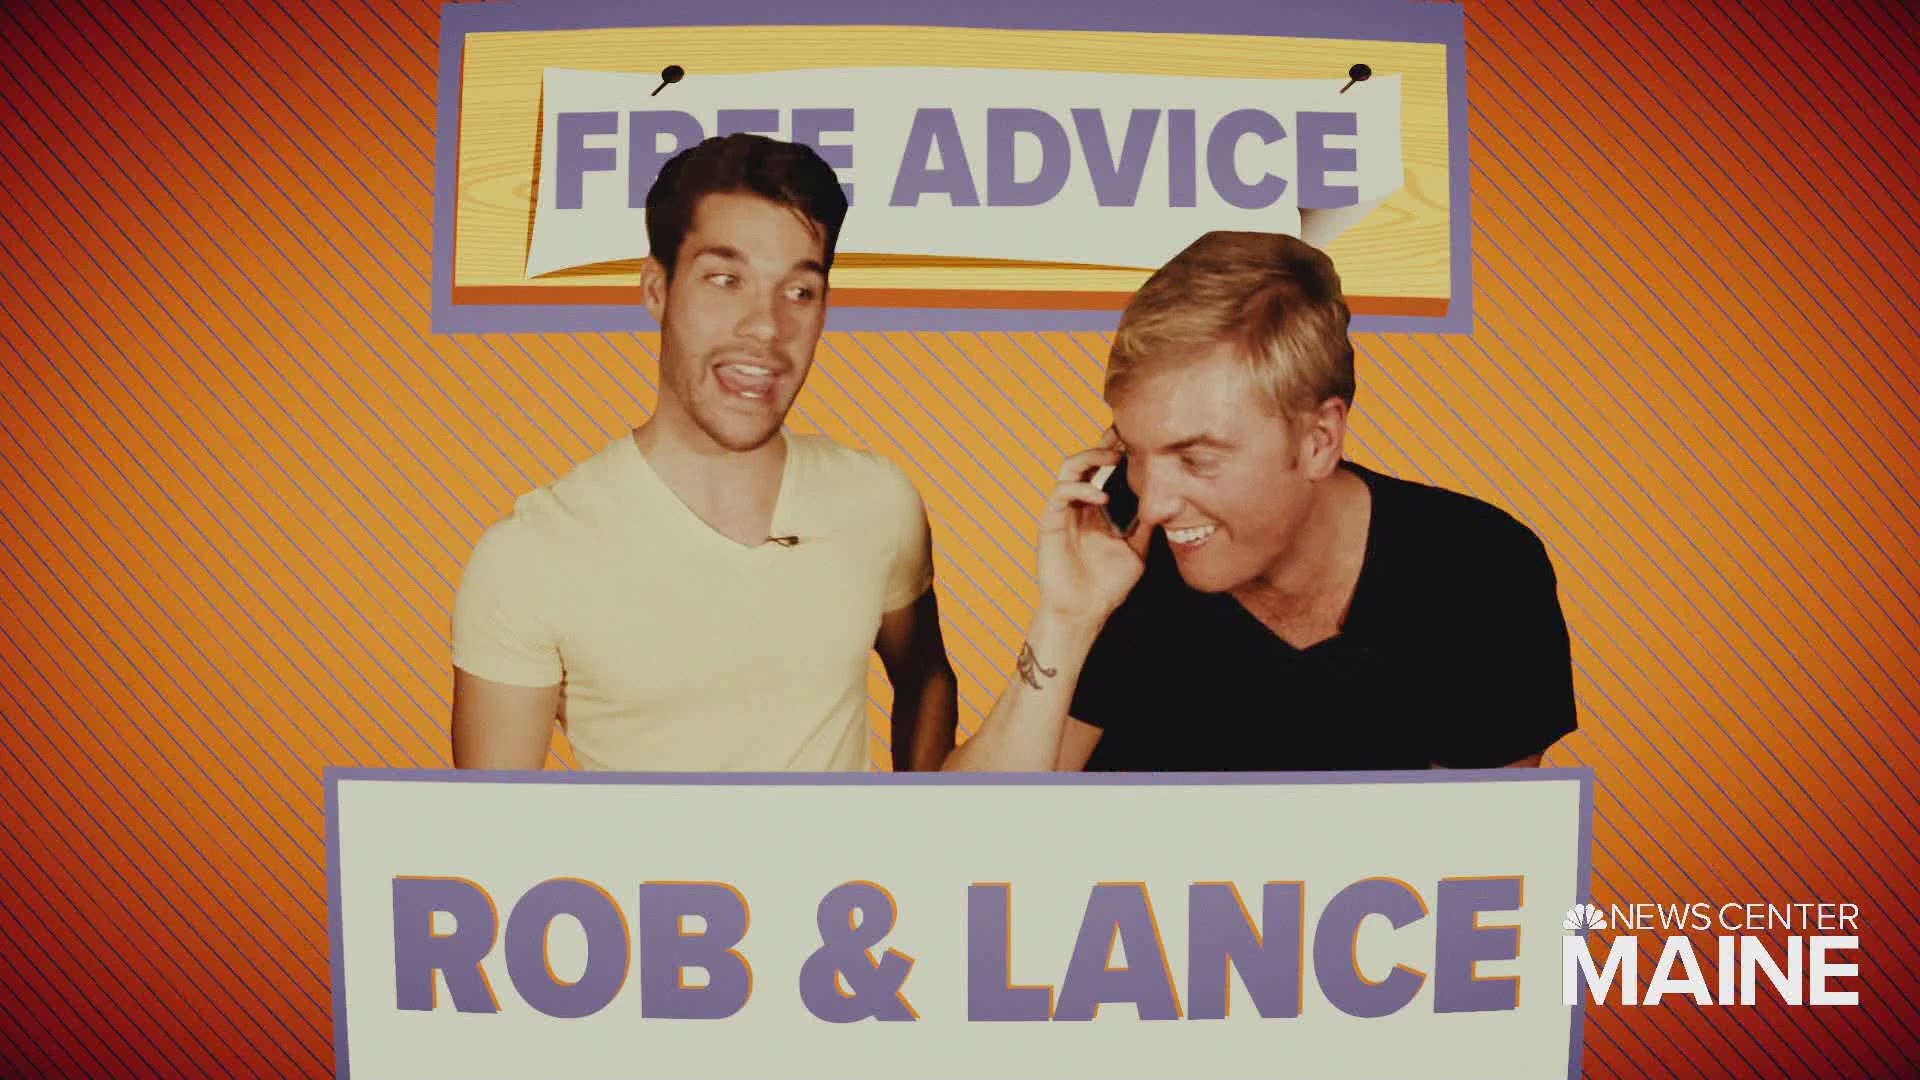 This week on Take It Or Leave It, Rob and Lance give their best dating advice.